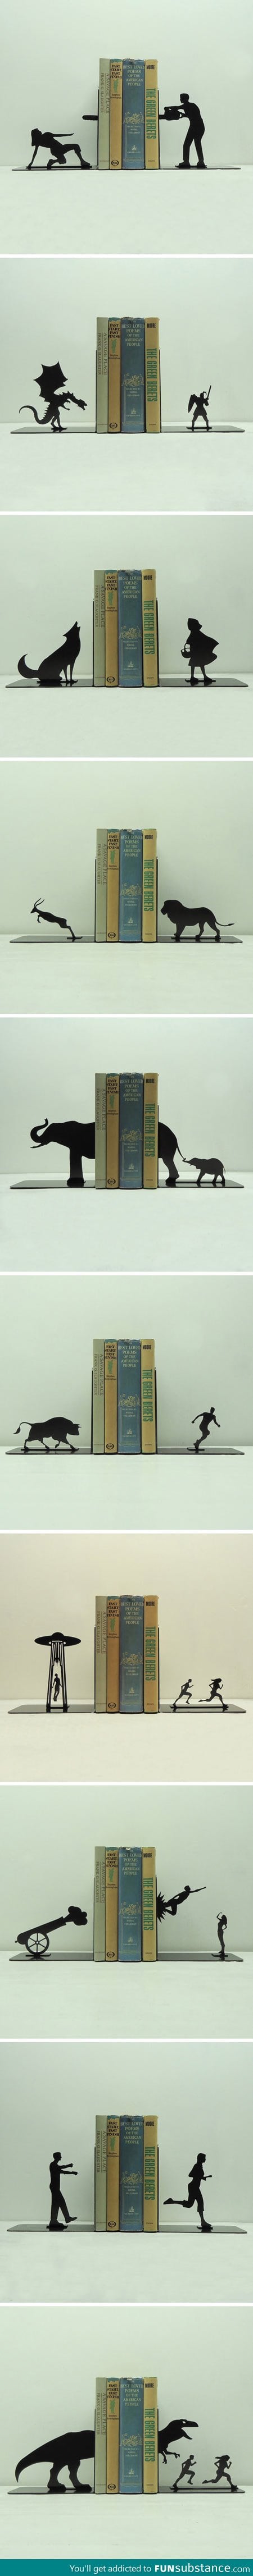 Some Creative Bookends